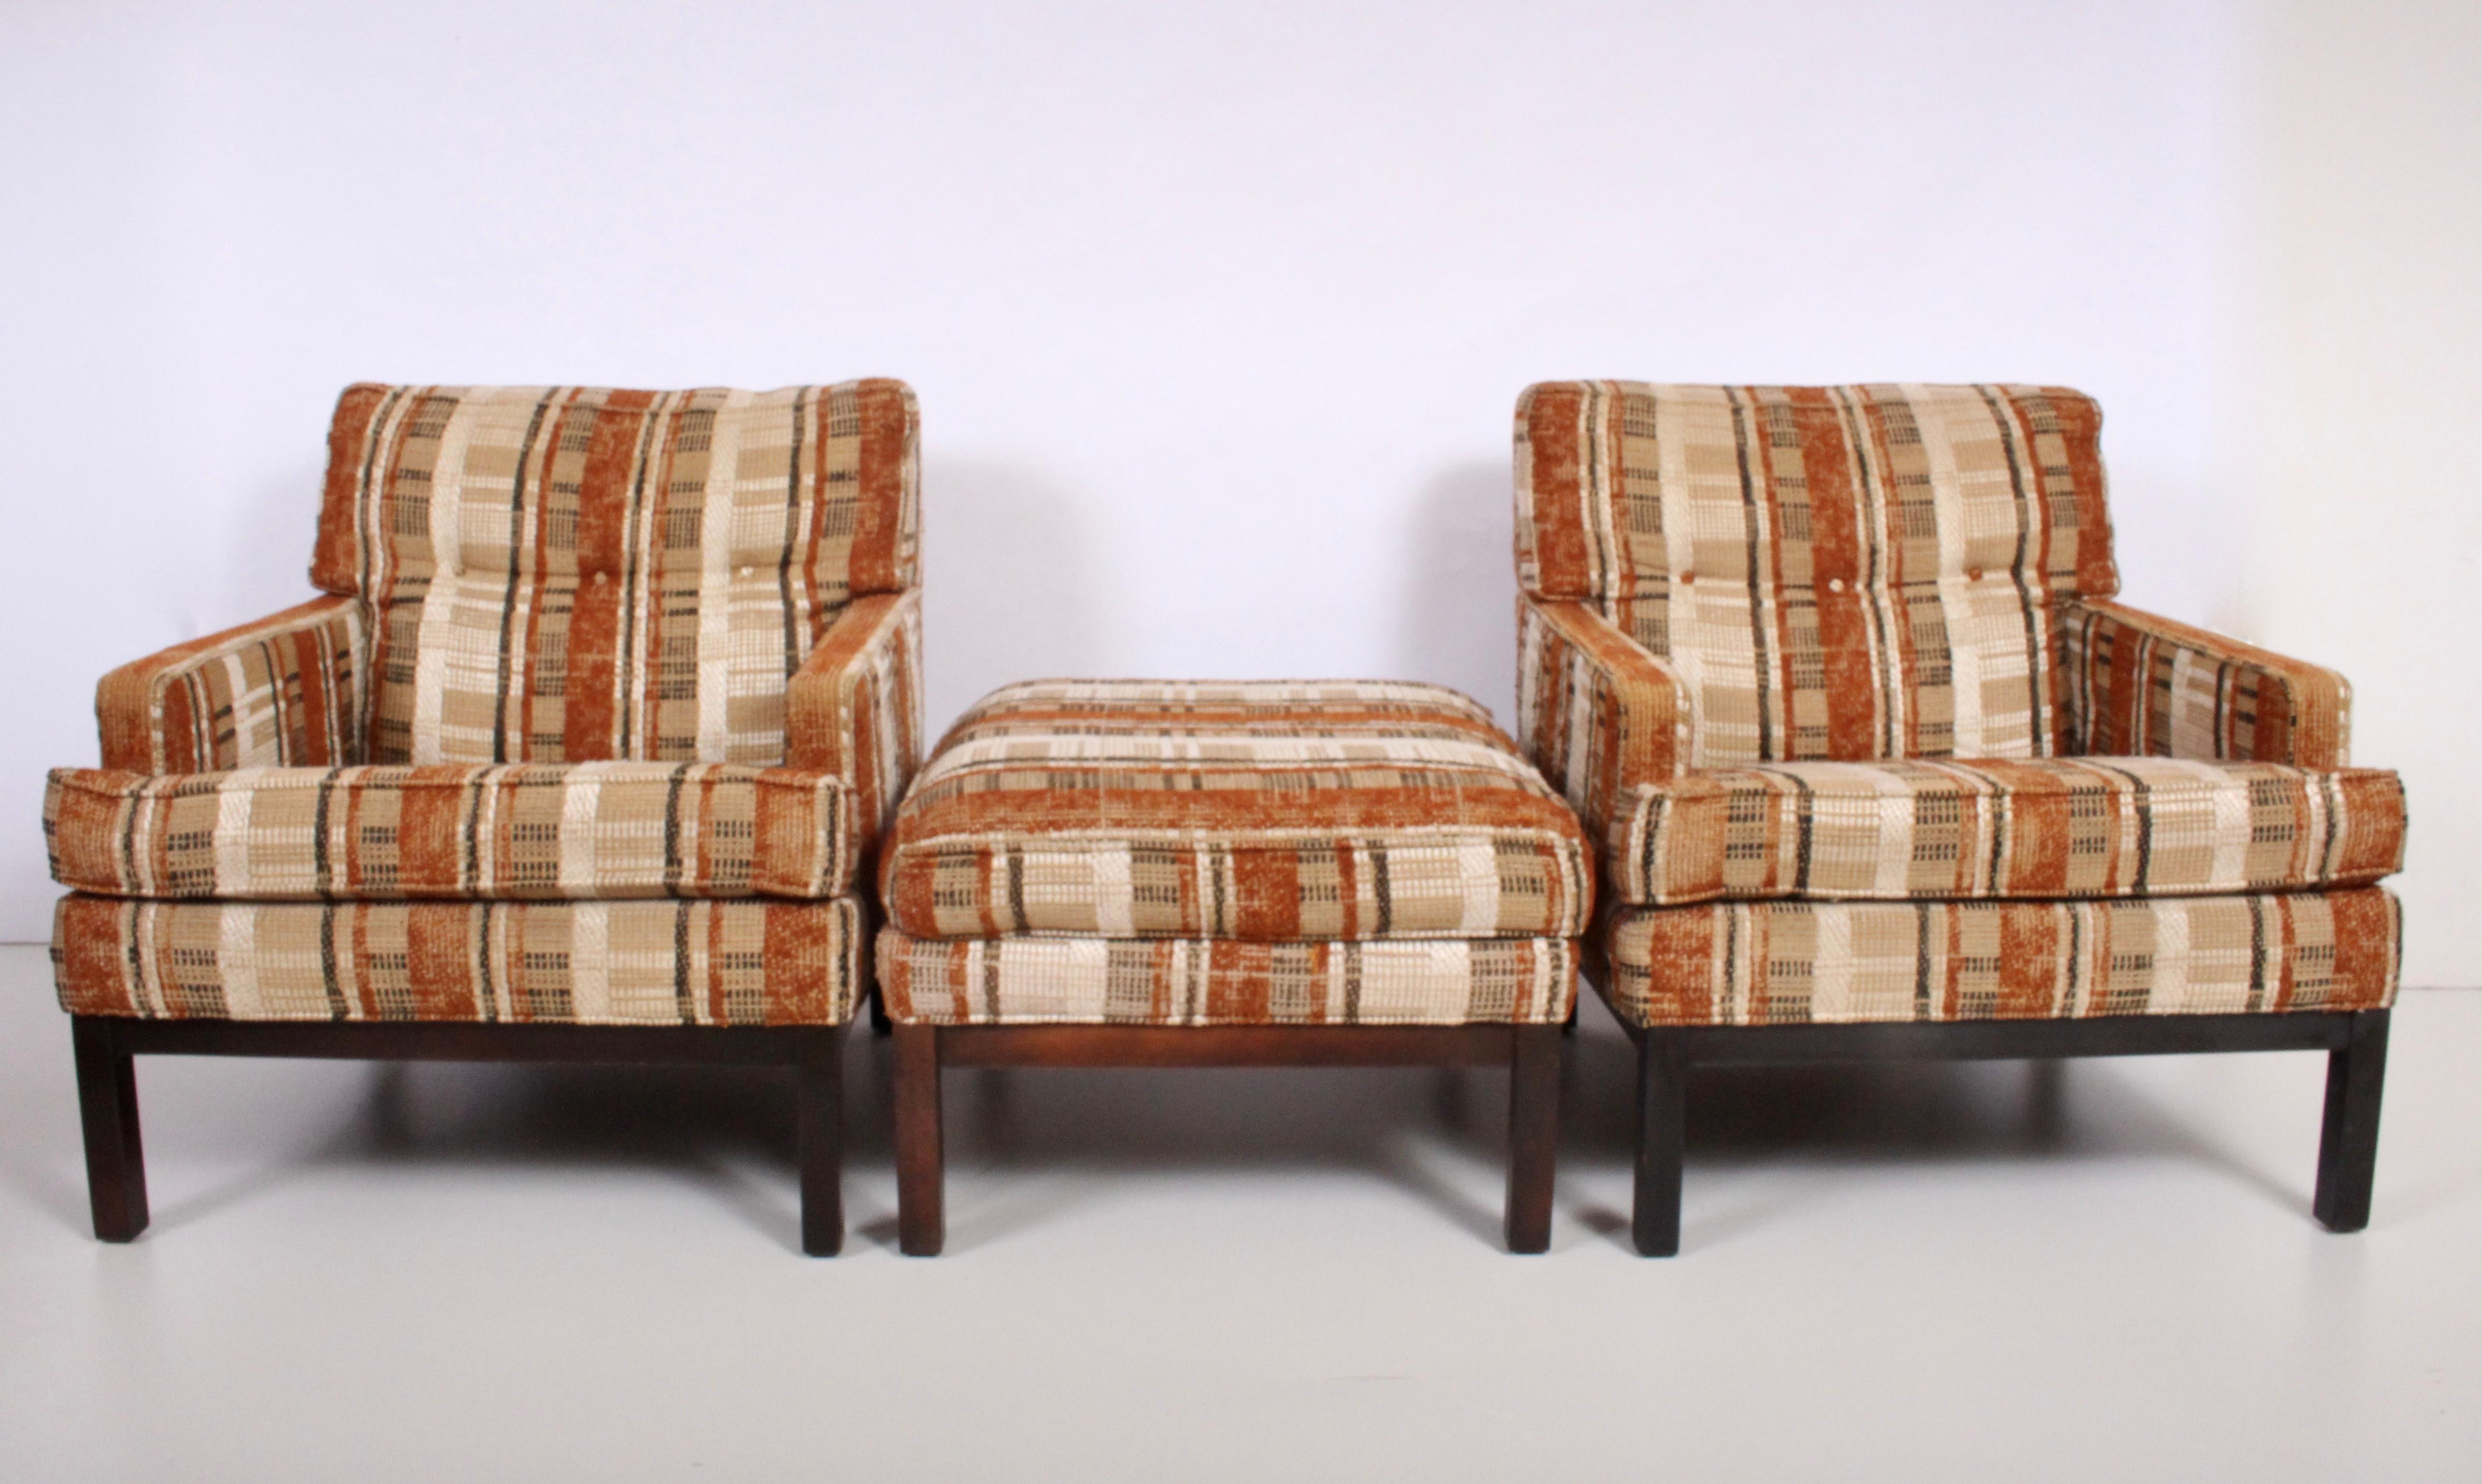 Pair of Harvey Probber lacquered dark walnut for Directional custom collection club chairs with single ottoman. Original blended cotton felt fabric in Earthen tones of rust taupe, chocolate cream and wheat. Ottoman: 29 W x 24 D x 17 H. With